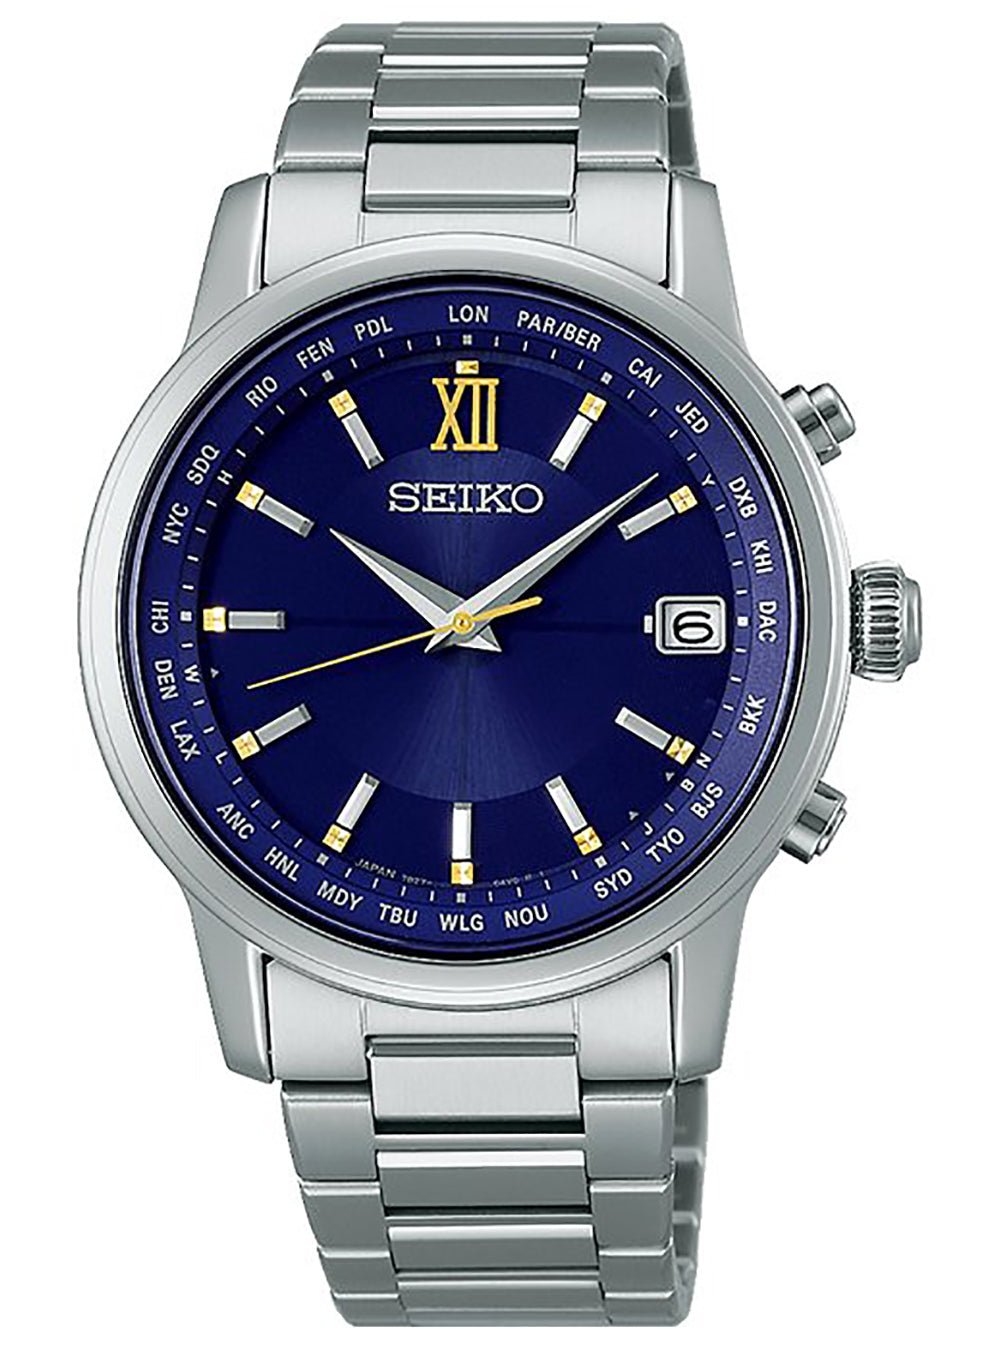 SEIKO BRIGHTS 2020 ETERNAL BLUE LIMITED EDITION SAGZ109 MADE IN JAPAN JDMWRISTWATCHjapan-select